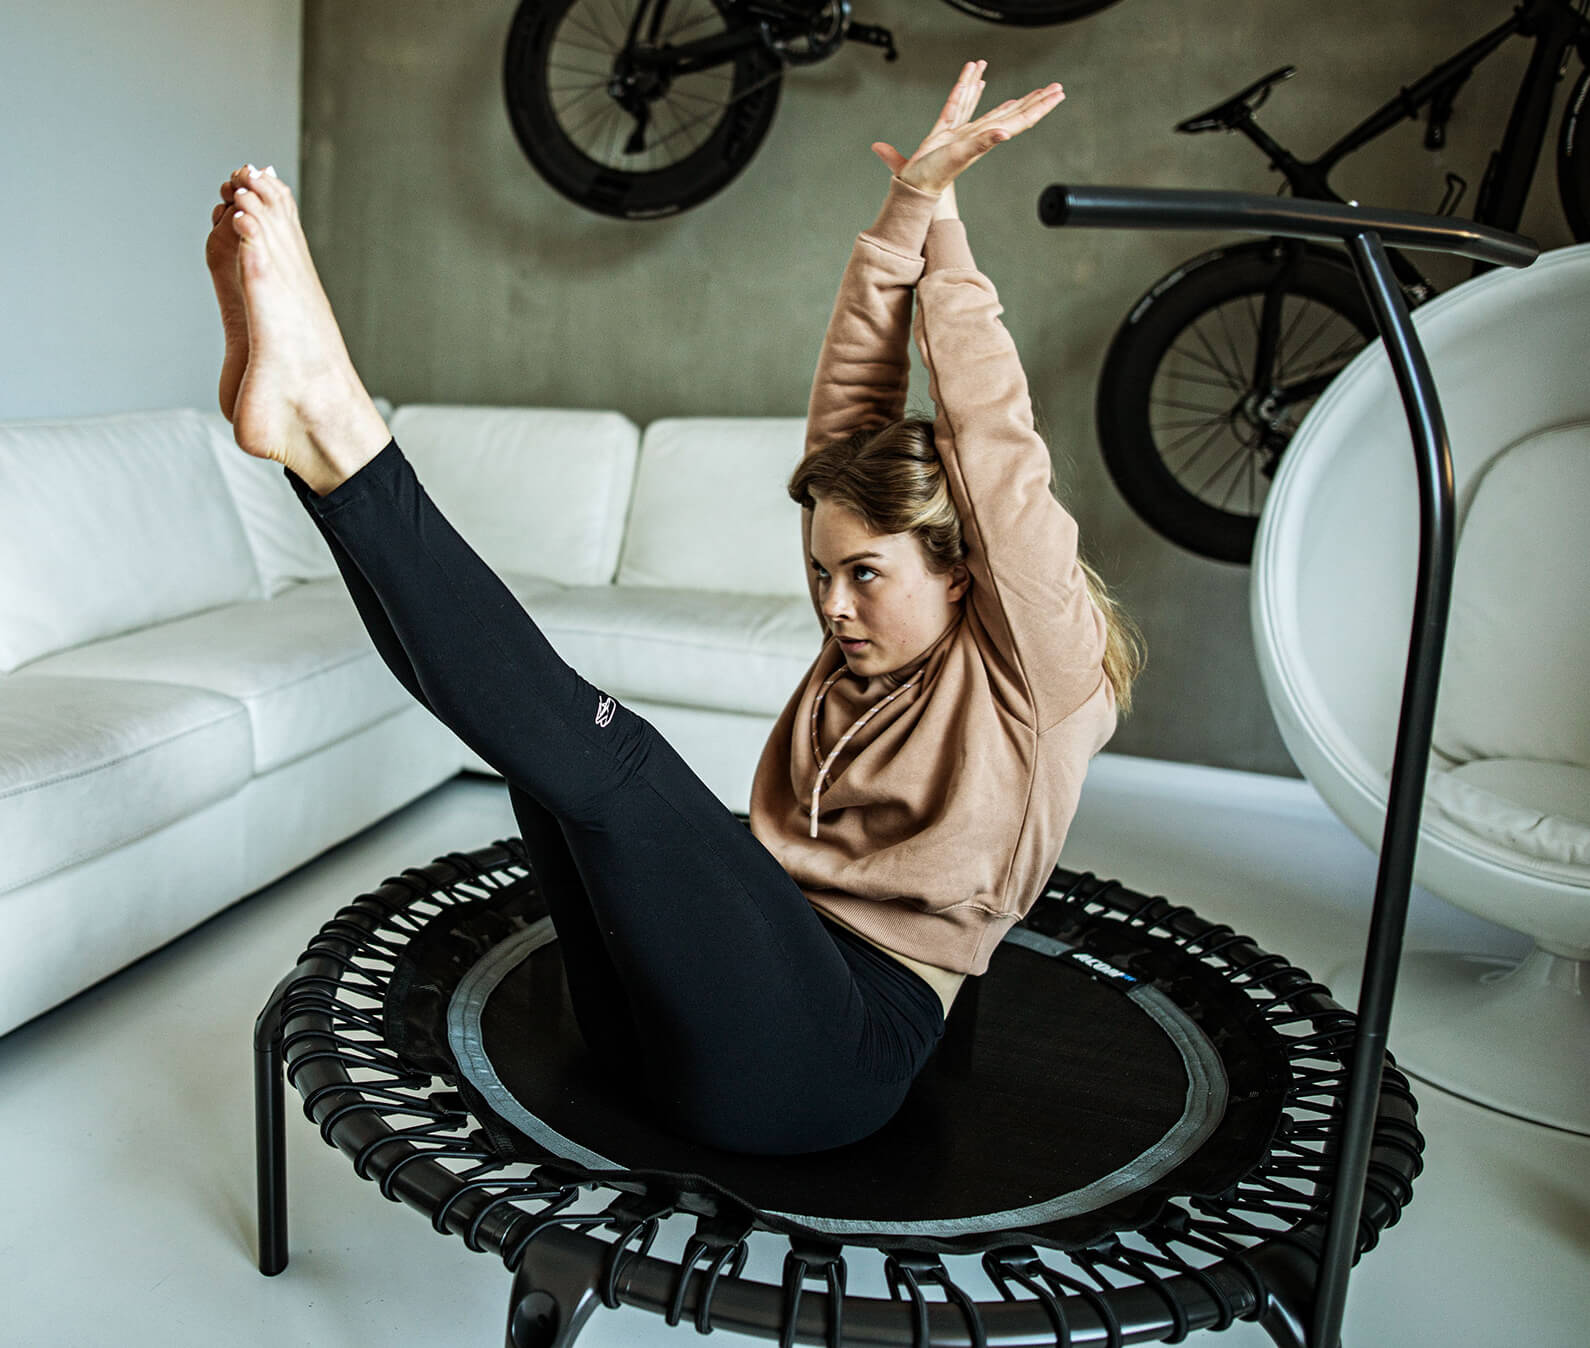 Woman doing a core exercise on a fitness rebounder in her livingroom.